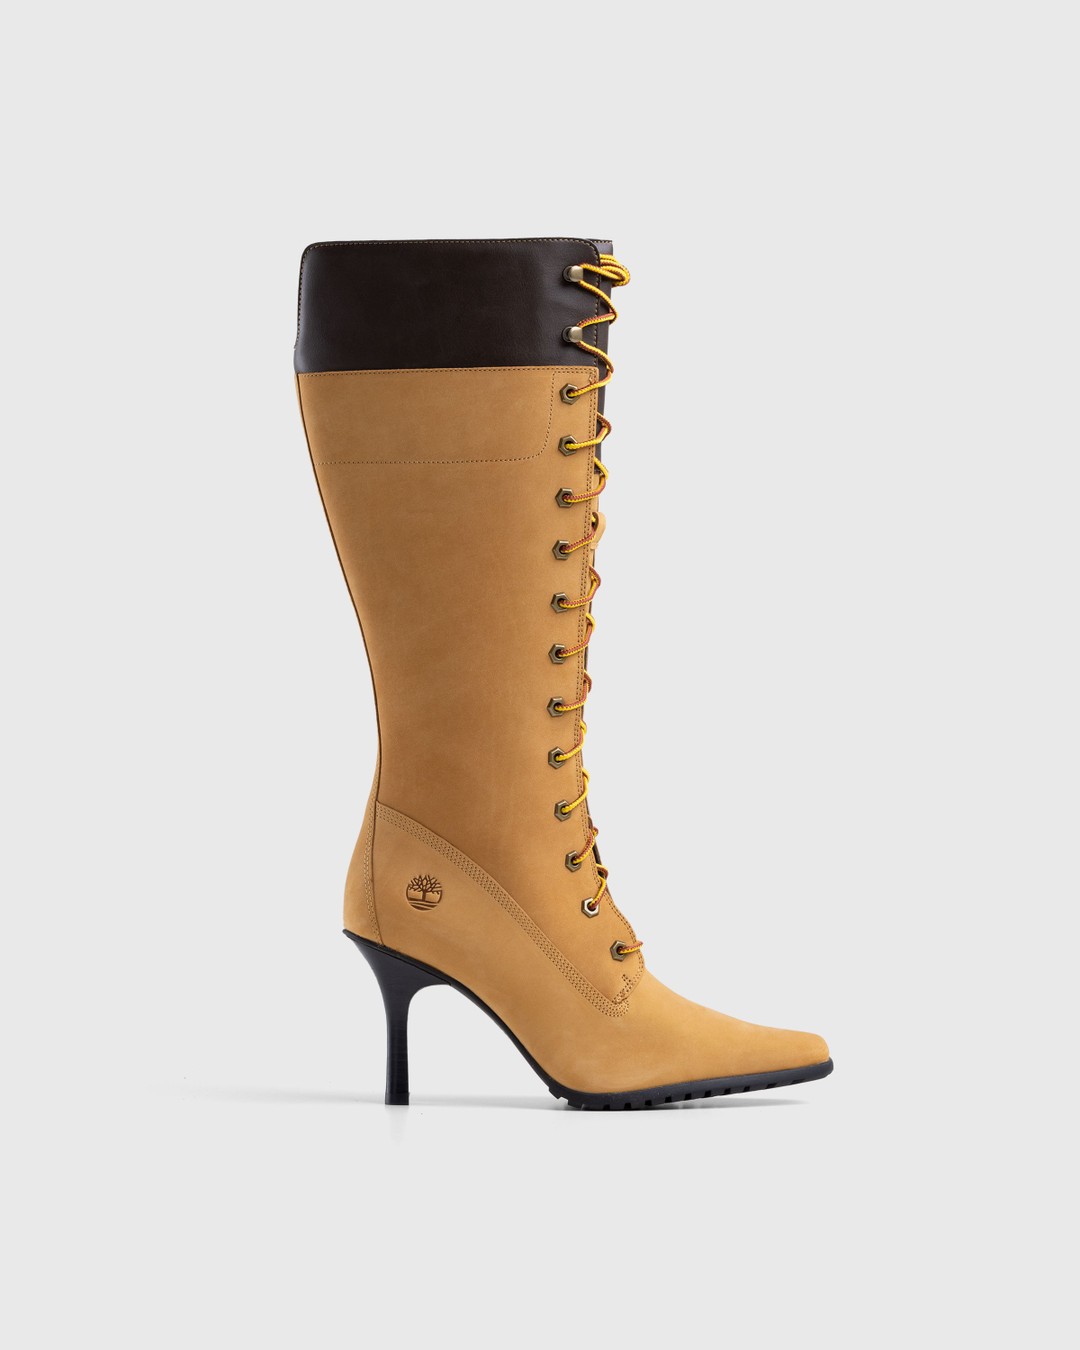 Veneda Carter x Timberland – Tall Lace Boot Yellow - Boots - Brown - Image 1